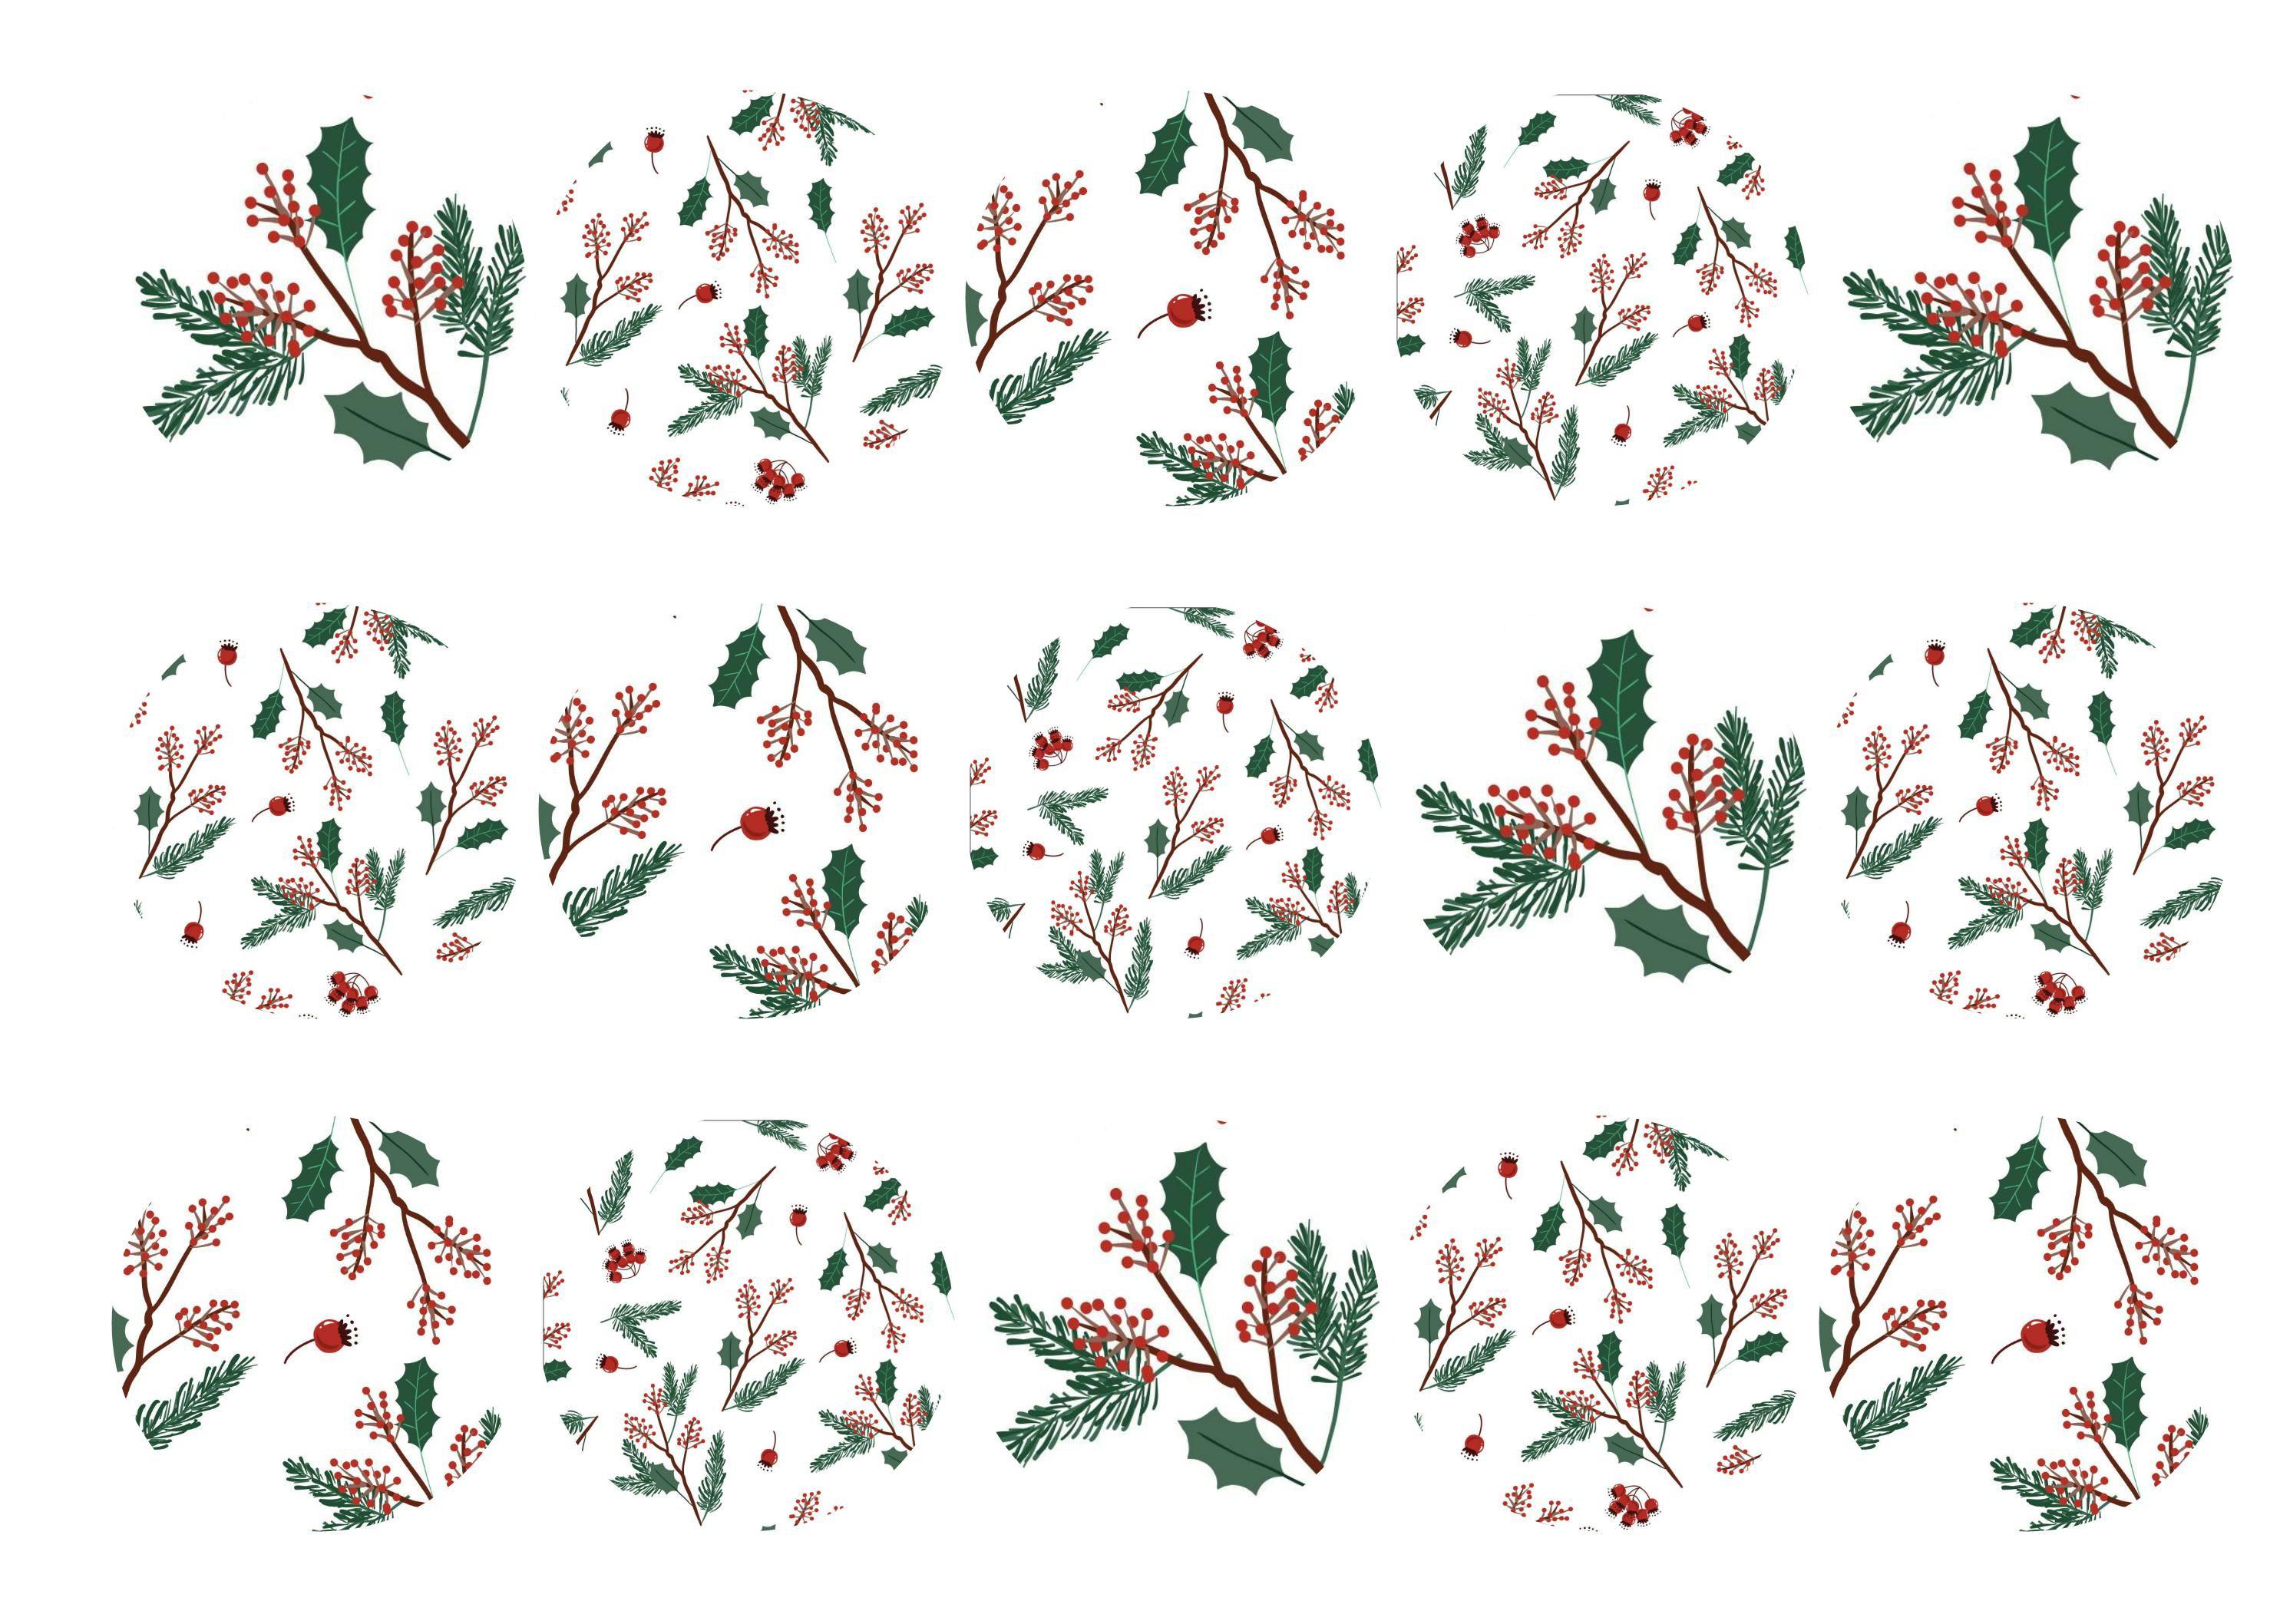 15 printed cupcake toppers with a Christmas holly pattern